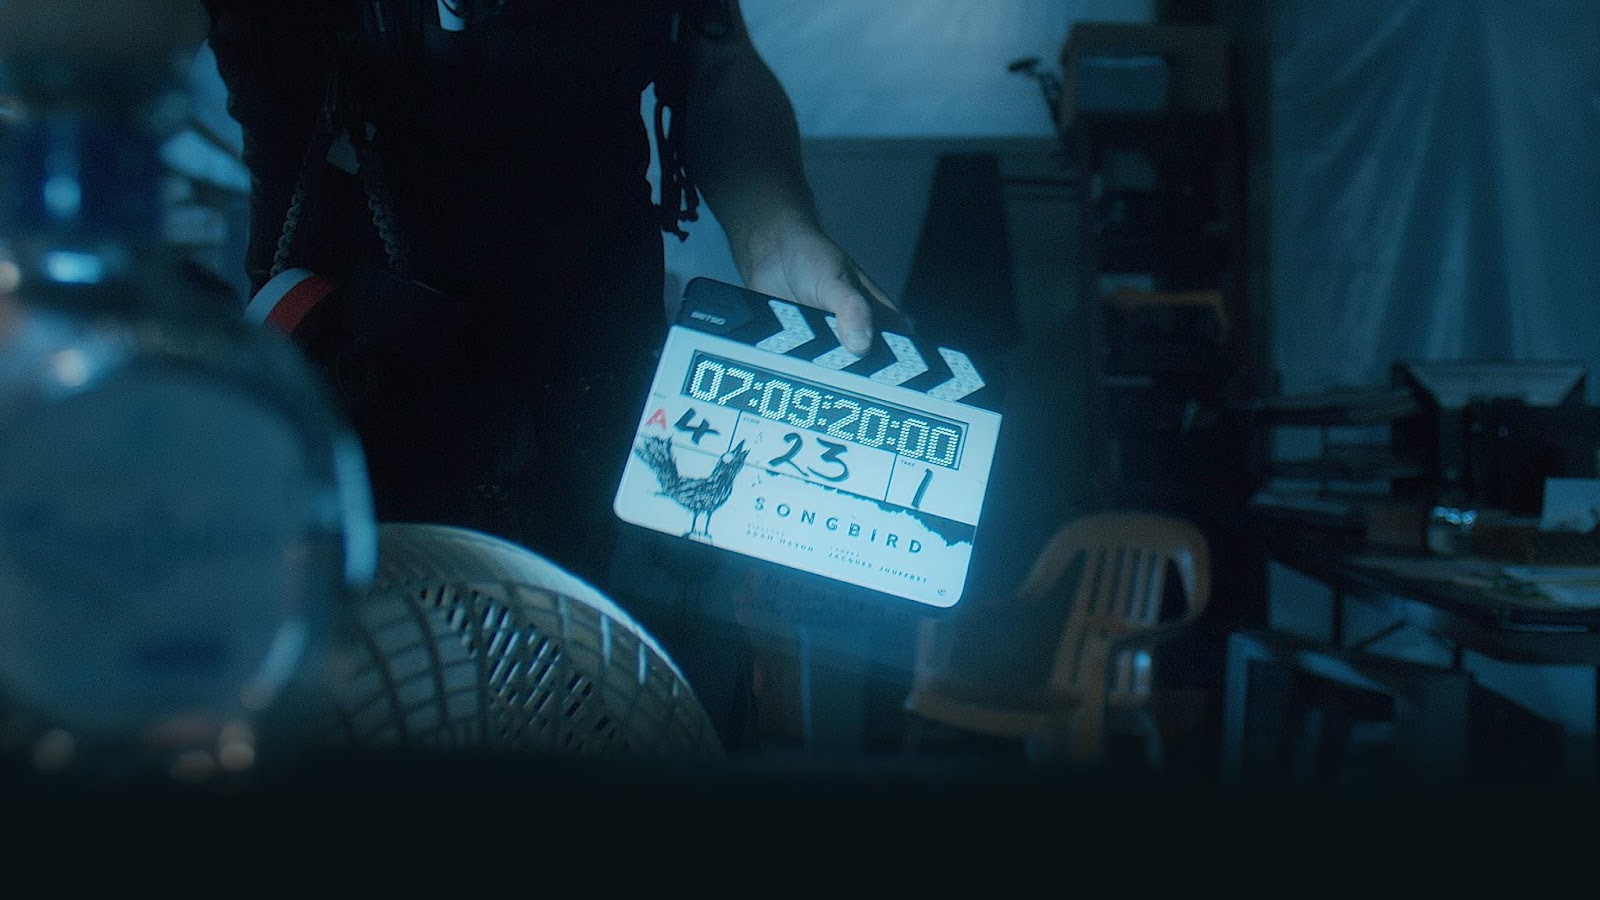 Slate for Songbird, the first feature to be produced during lockdown